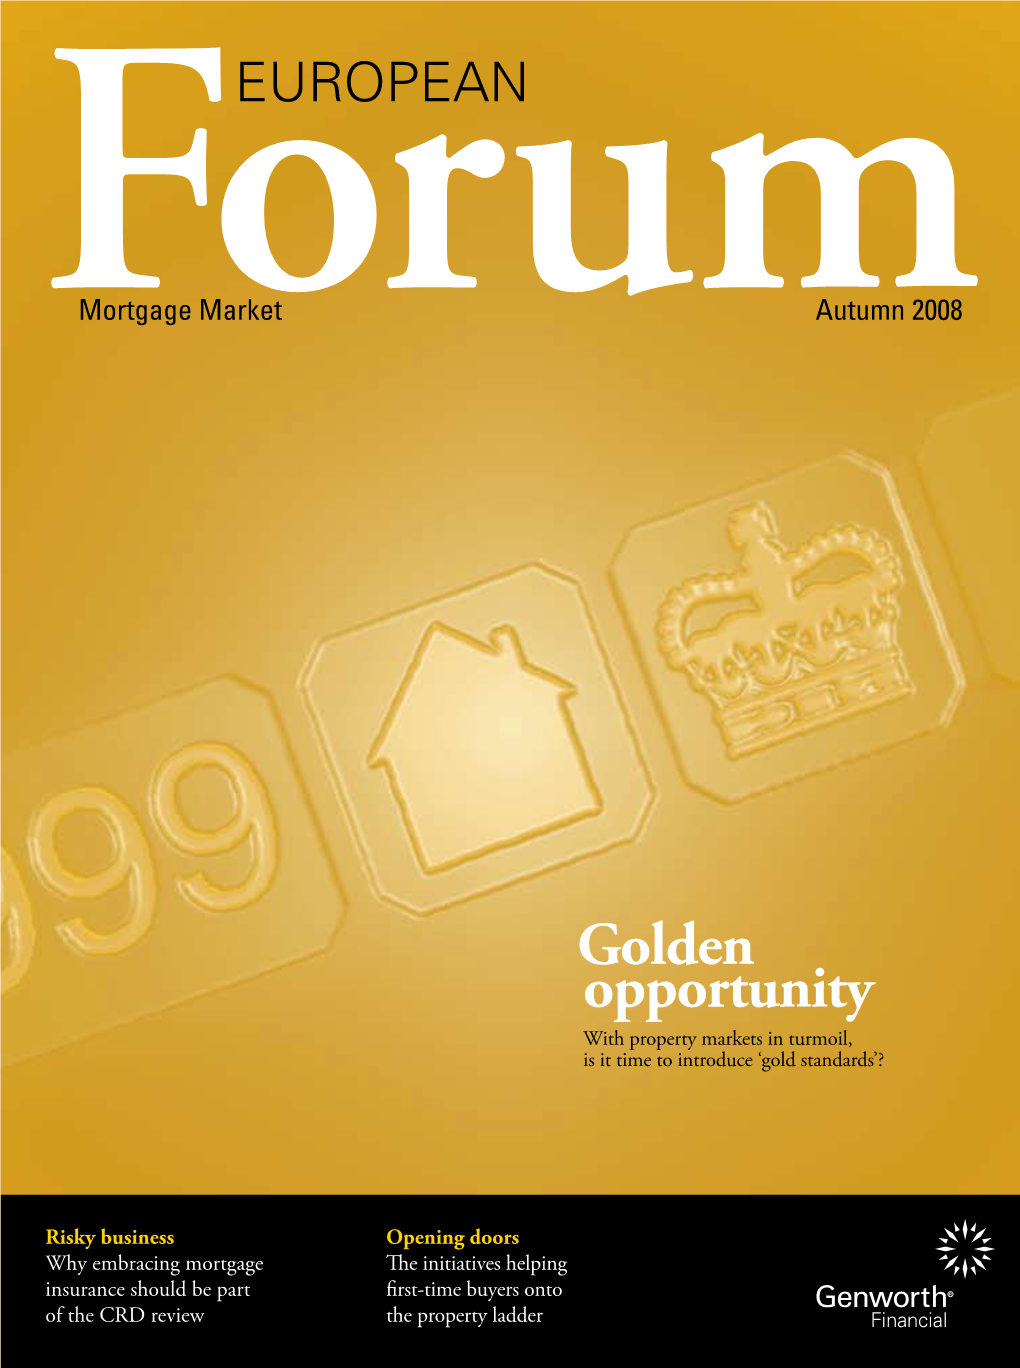 Golden Opportunity with Property Markets in Turmoil, Is It Time to Introduce ‘Gold Standards’?